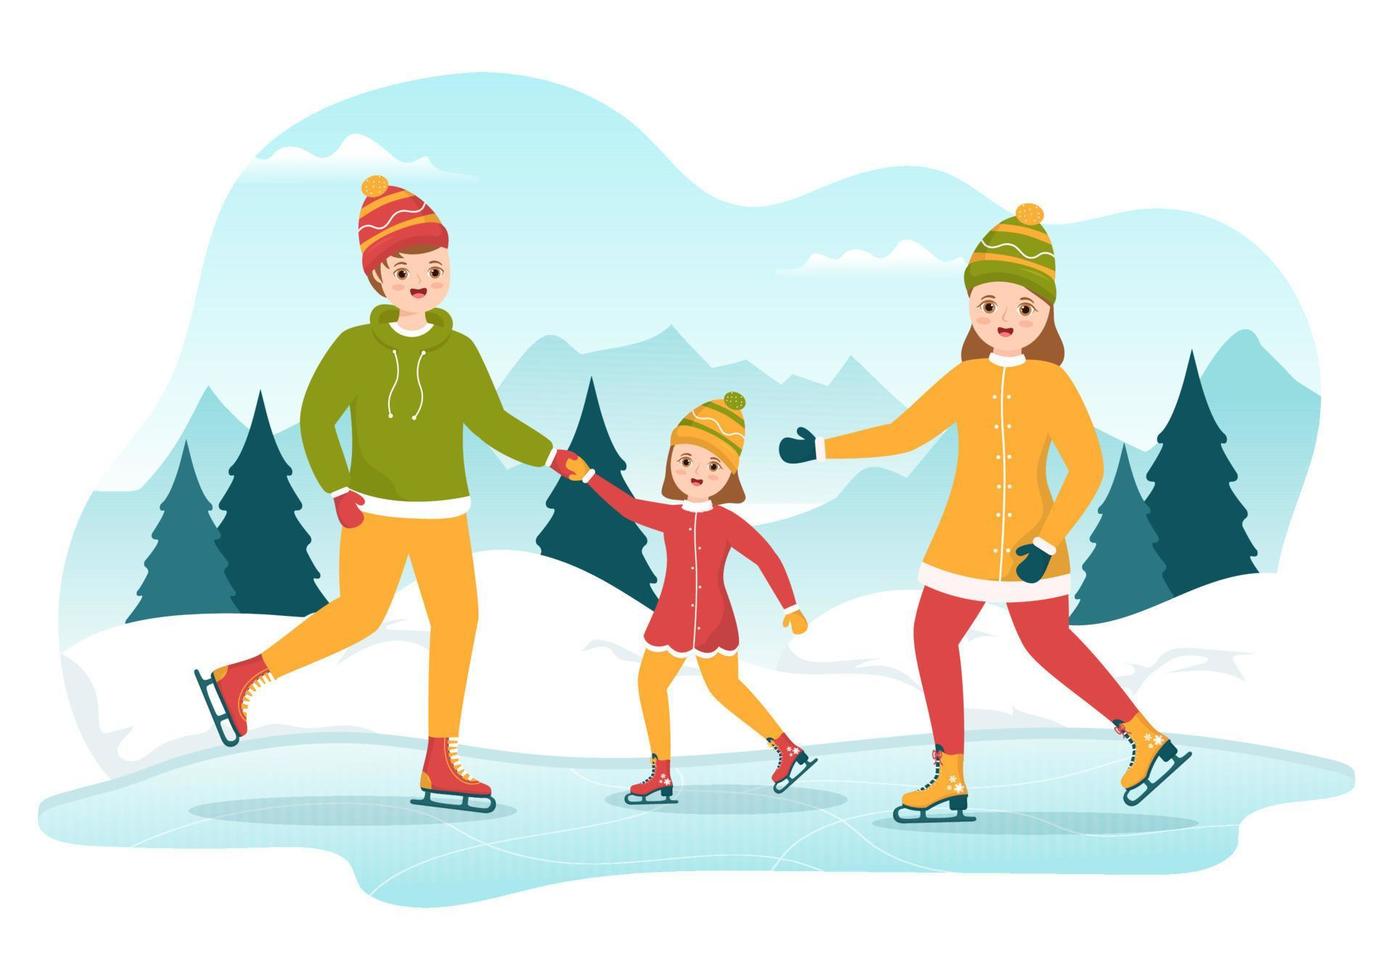 Men, Women and Kids Skating on Ice Rink Wearing Winter Clothes for Outdoor Activity in Flat Cartoon Hand Drawn Templates Illustration vector